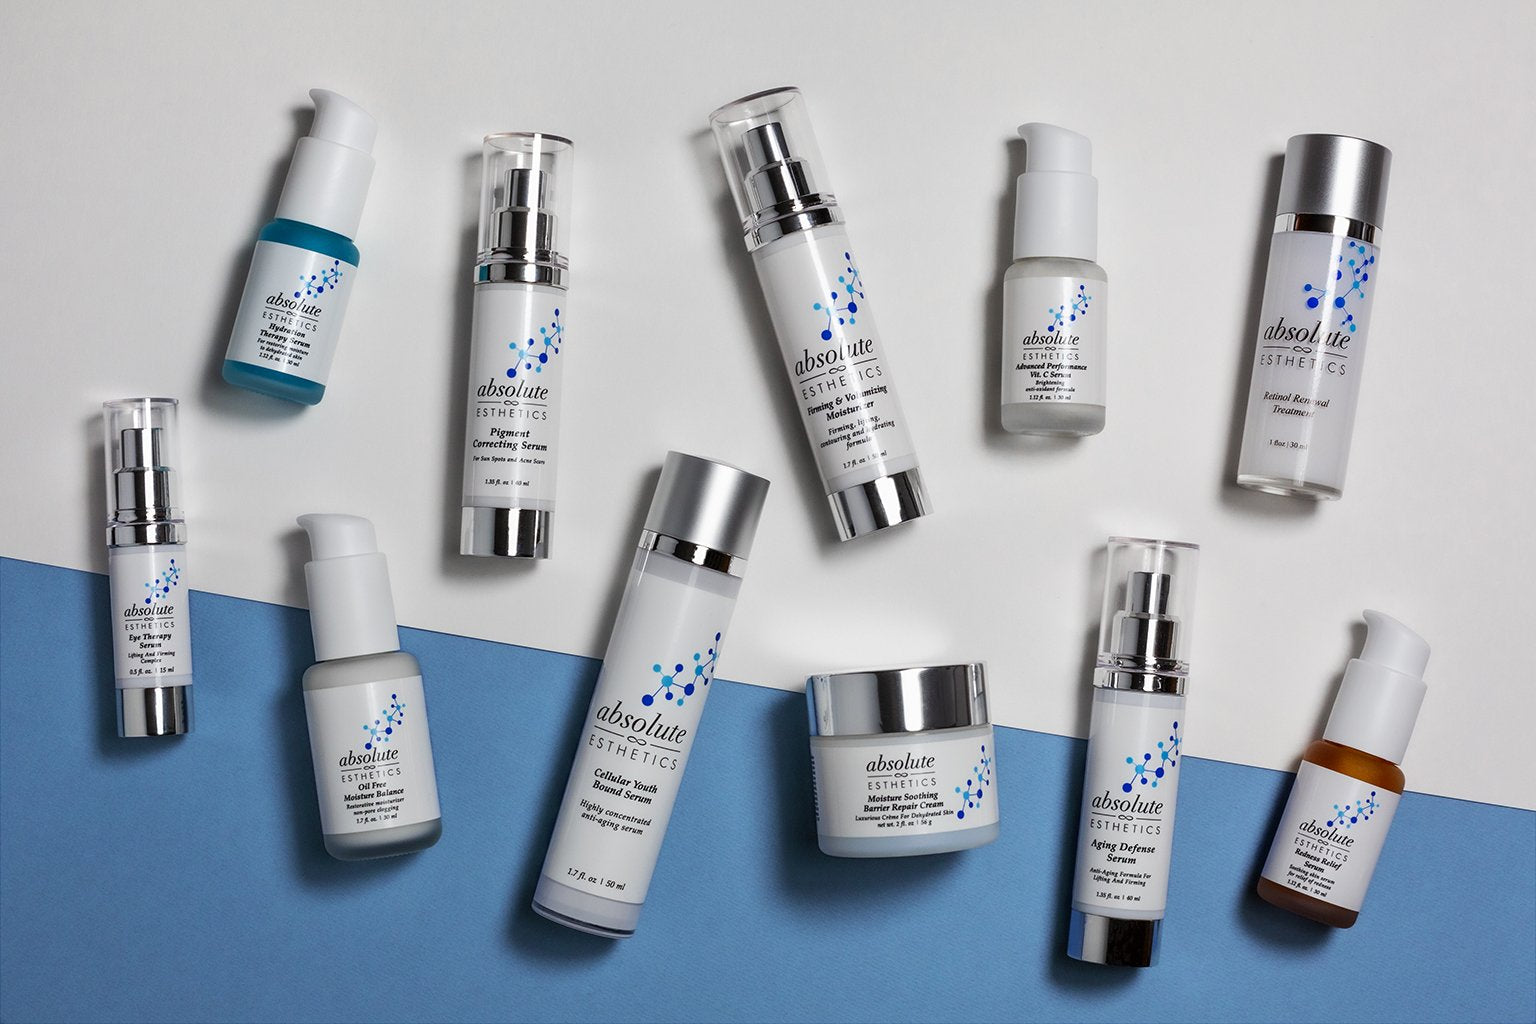 Absolute Esthetics Anti-Aging Skincare Products